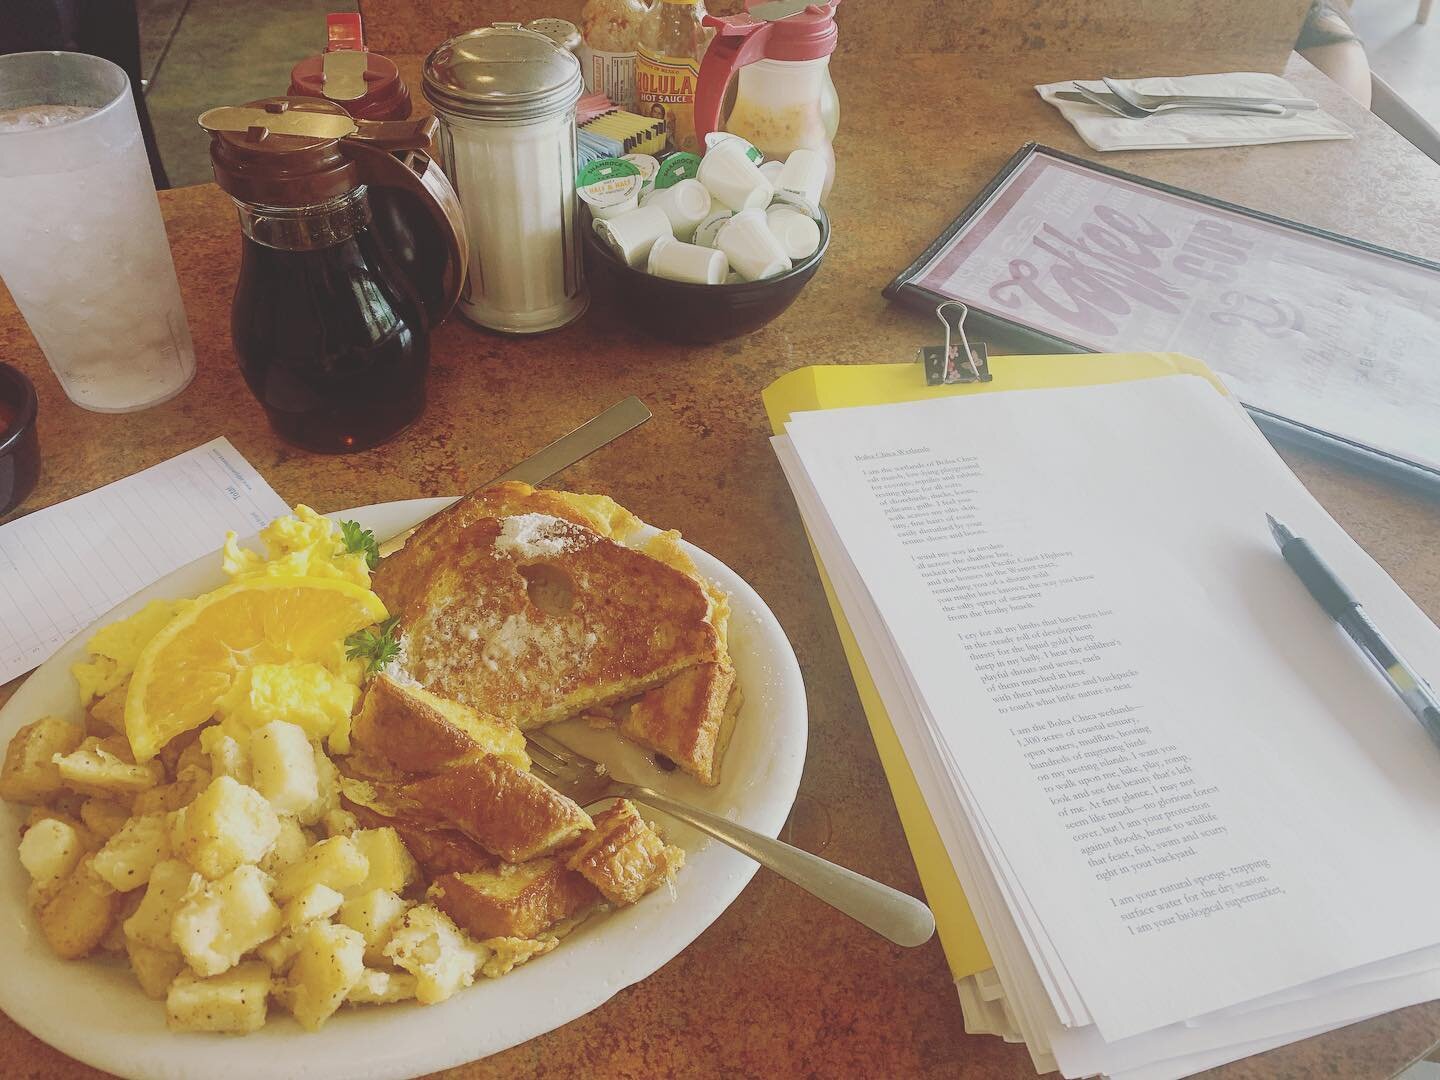 Love it - working on my Field Notes manuscript with some amazing breakfast from @coffeecupon4th - right now I have 9 months of field notes and poems from the last 2 years to place together - I have been super into the poems I&rsquo;ve been rolling ou